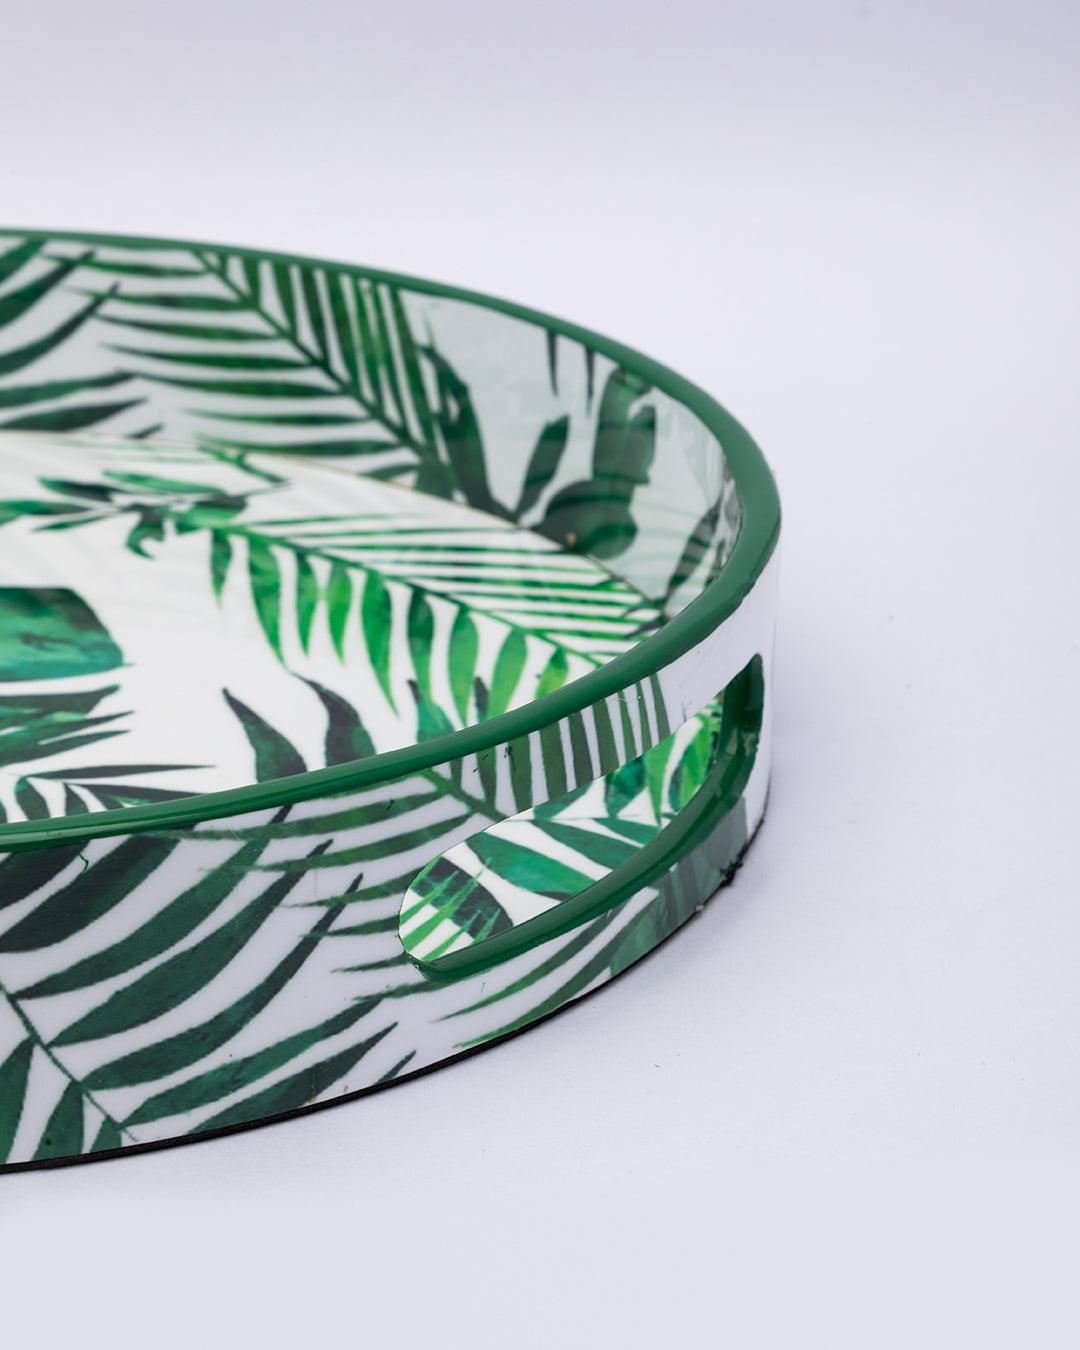 Market99 Decorative Serving Tray, Wooden Tray with Handles, Nature Inspired Design Tray, Home Décor, Medium, Round, Green Colour, MDF - MARKET 99